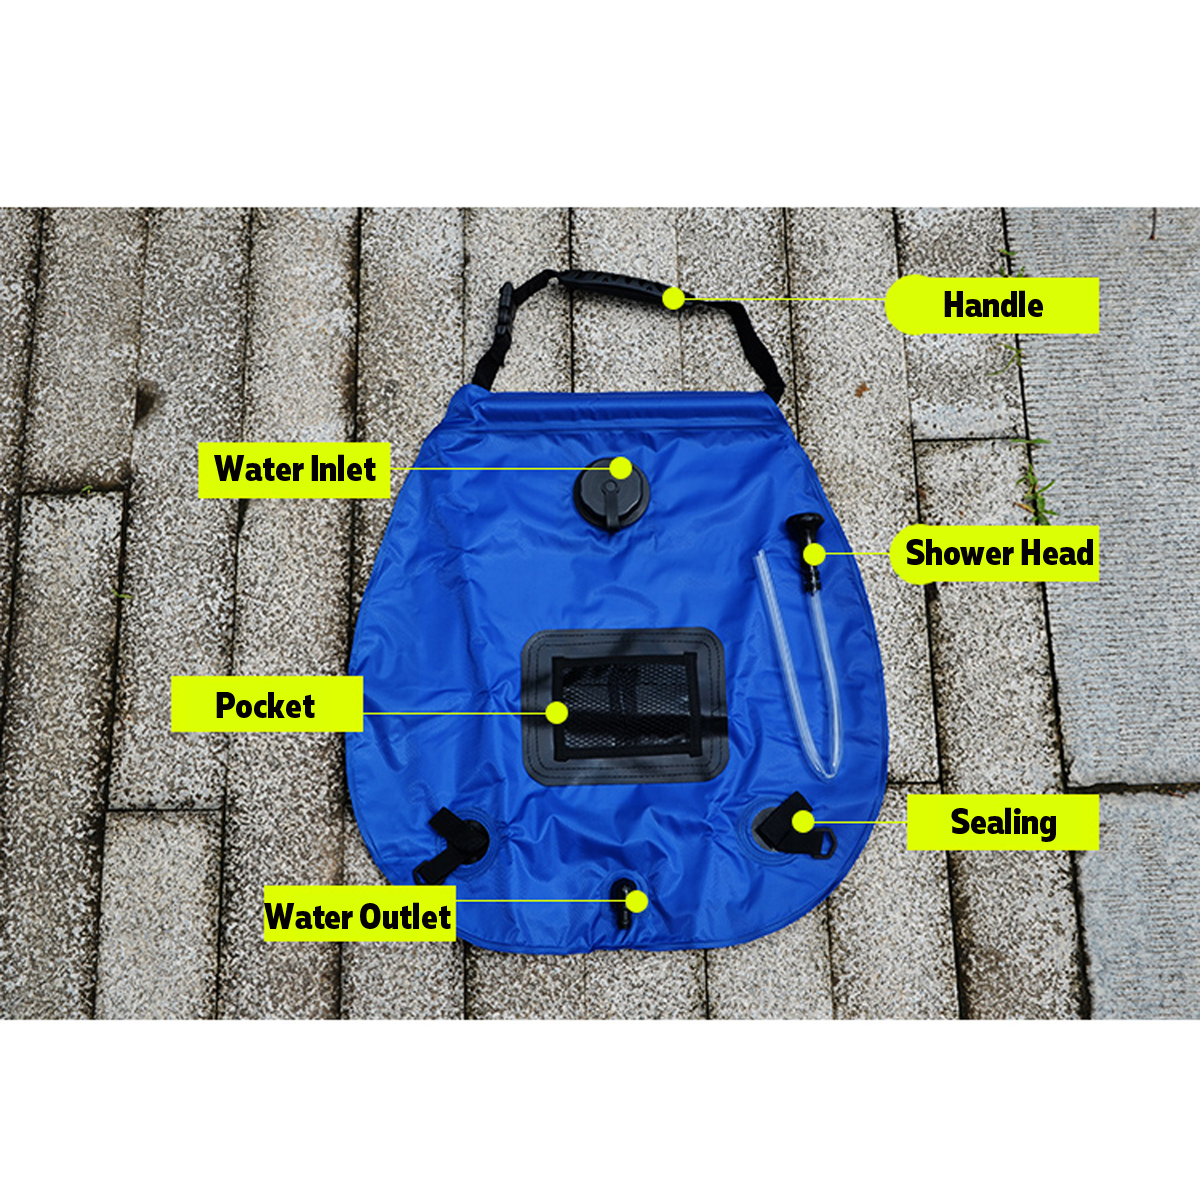 20L-Foldable-Portable-Water-Shower-Bathing-Bag-Solar-Energy-Heated-PVC-Outdoor-Travel-Camping-1724741-6